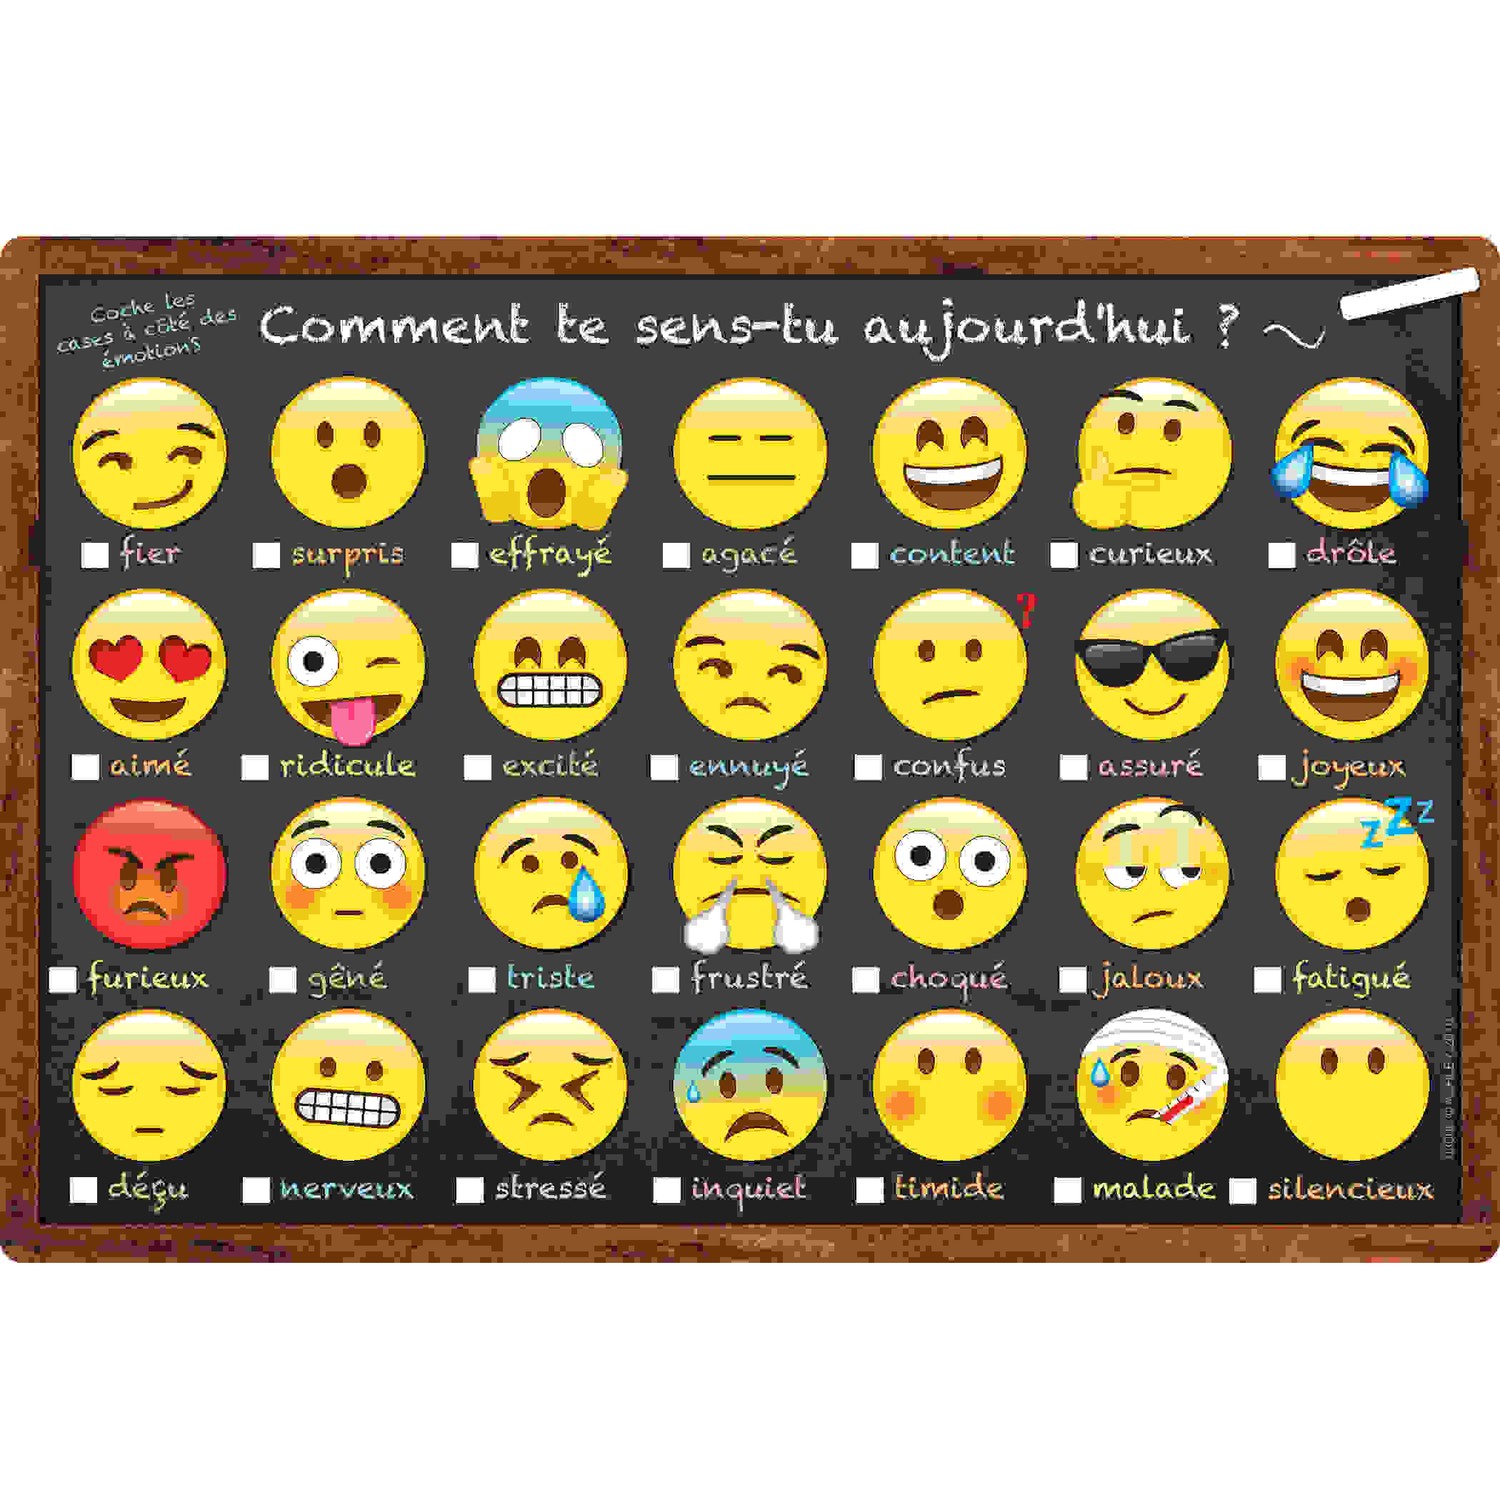 Smart Poly French Immersion Chart, 13" x 19", Emoji, Comment te sens-tu aujourd'hui ? (How Are You Feeling Today?)